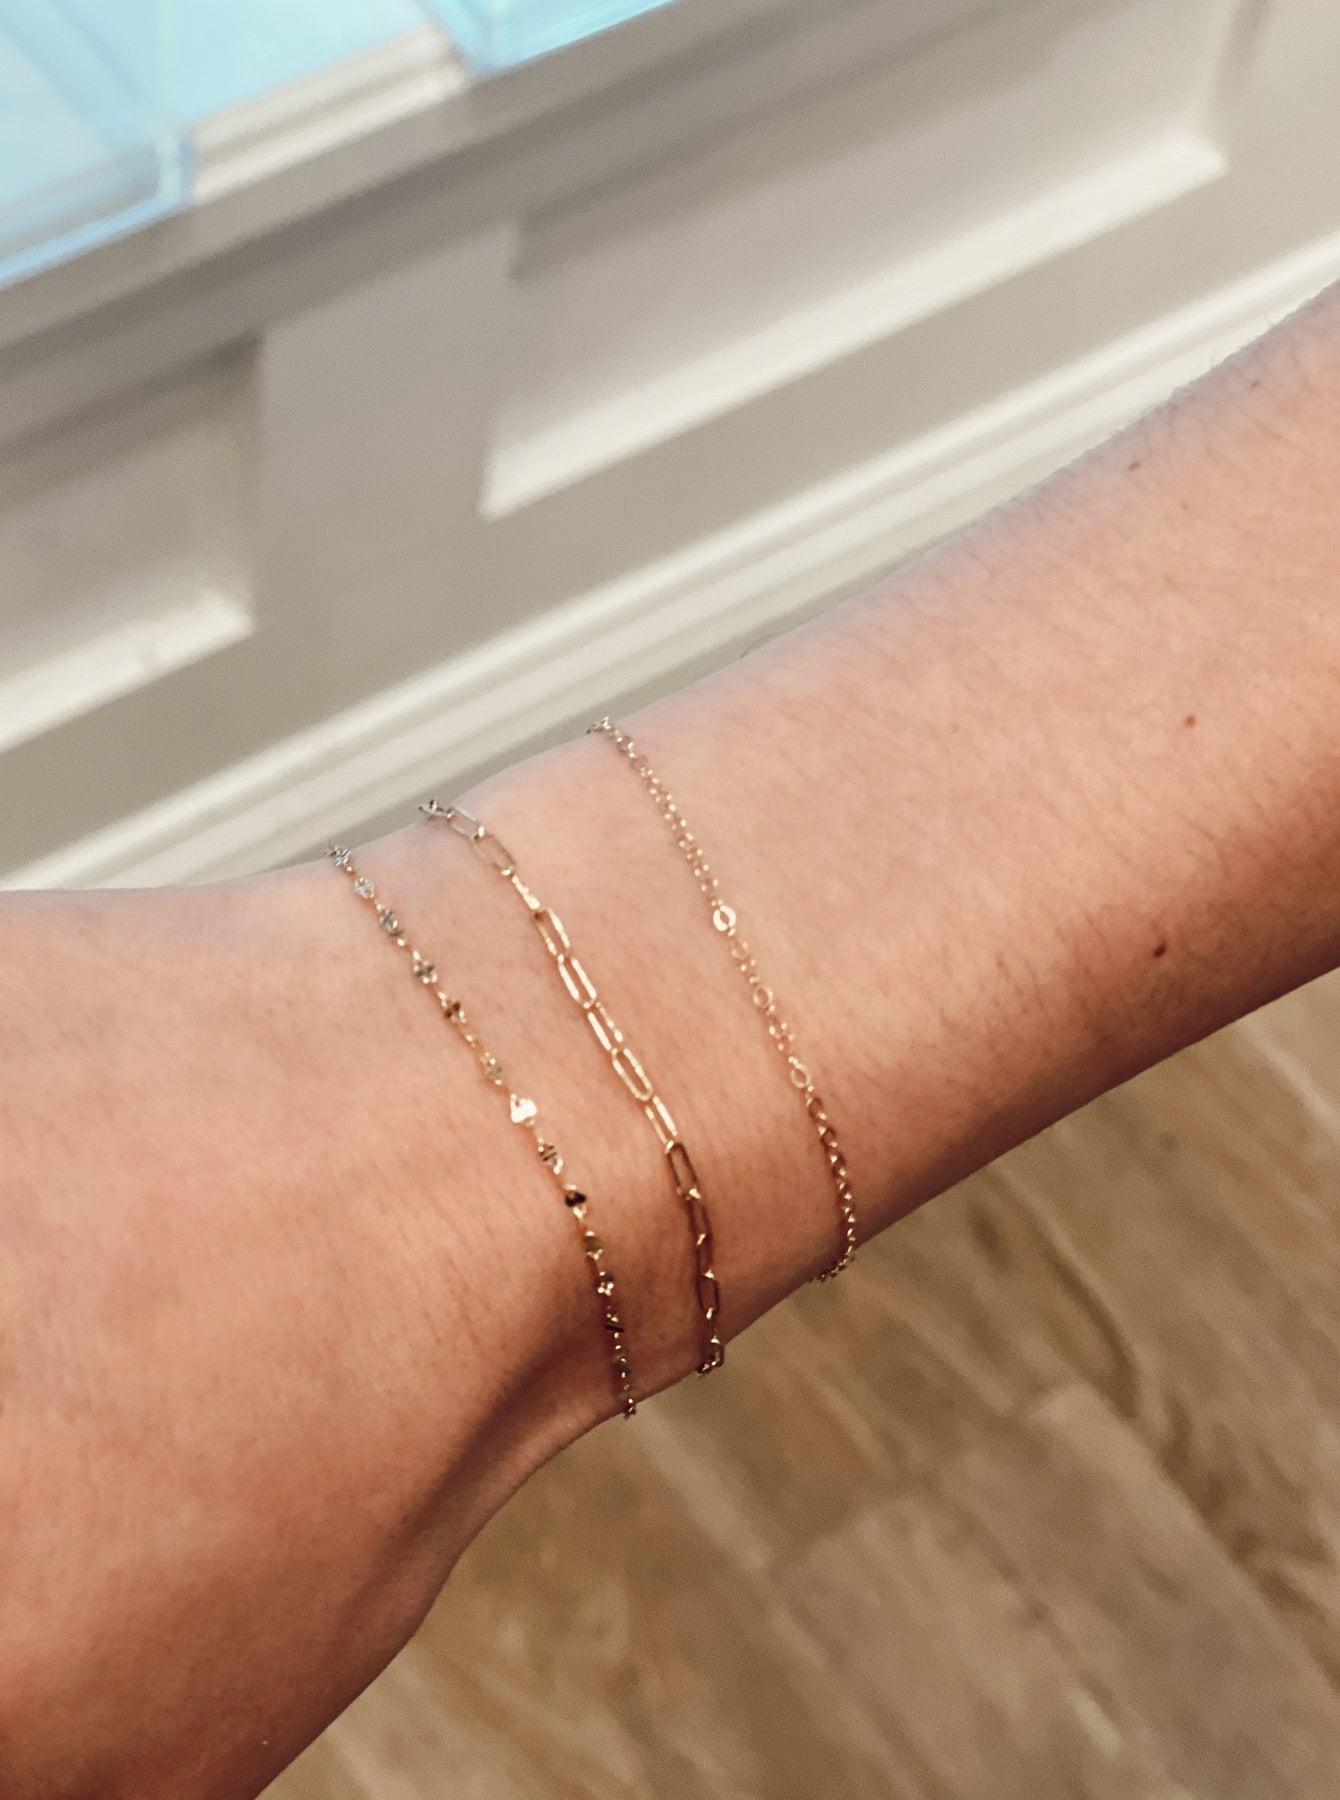 Friendship bracelets but make them forever. Visit the link lounge with your  bestie for one of our new forever bracelets. Walk in or make… | Instagram